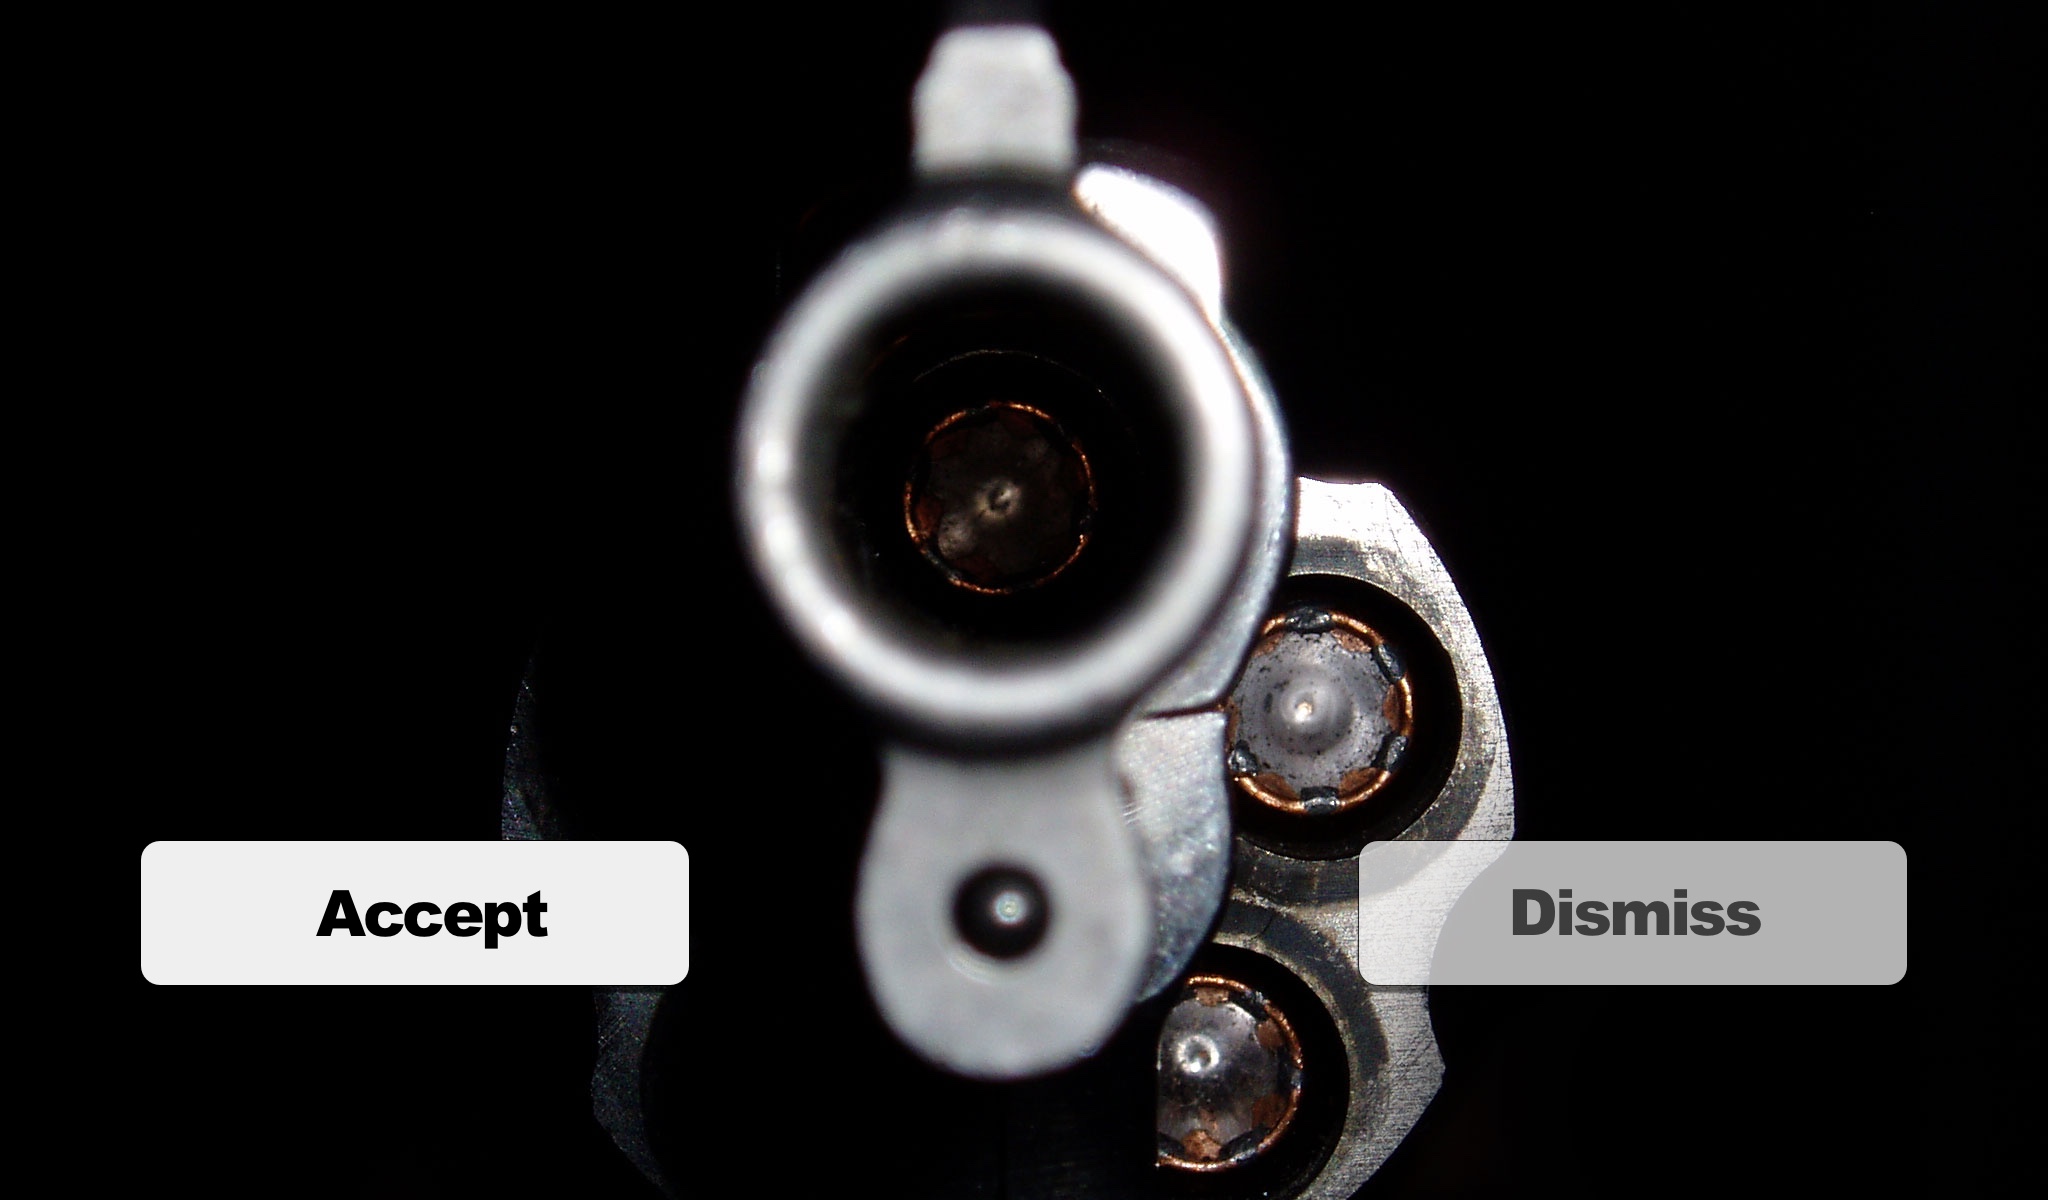 A revolver pointed at you with an accept button.